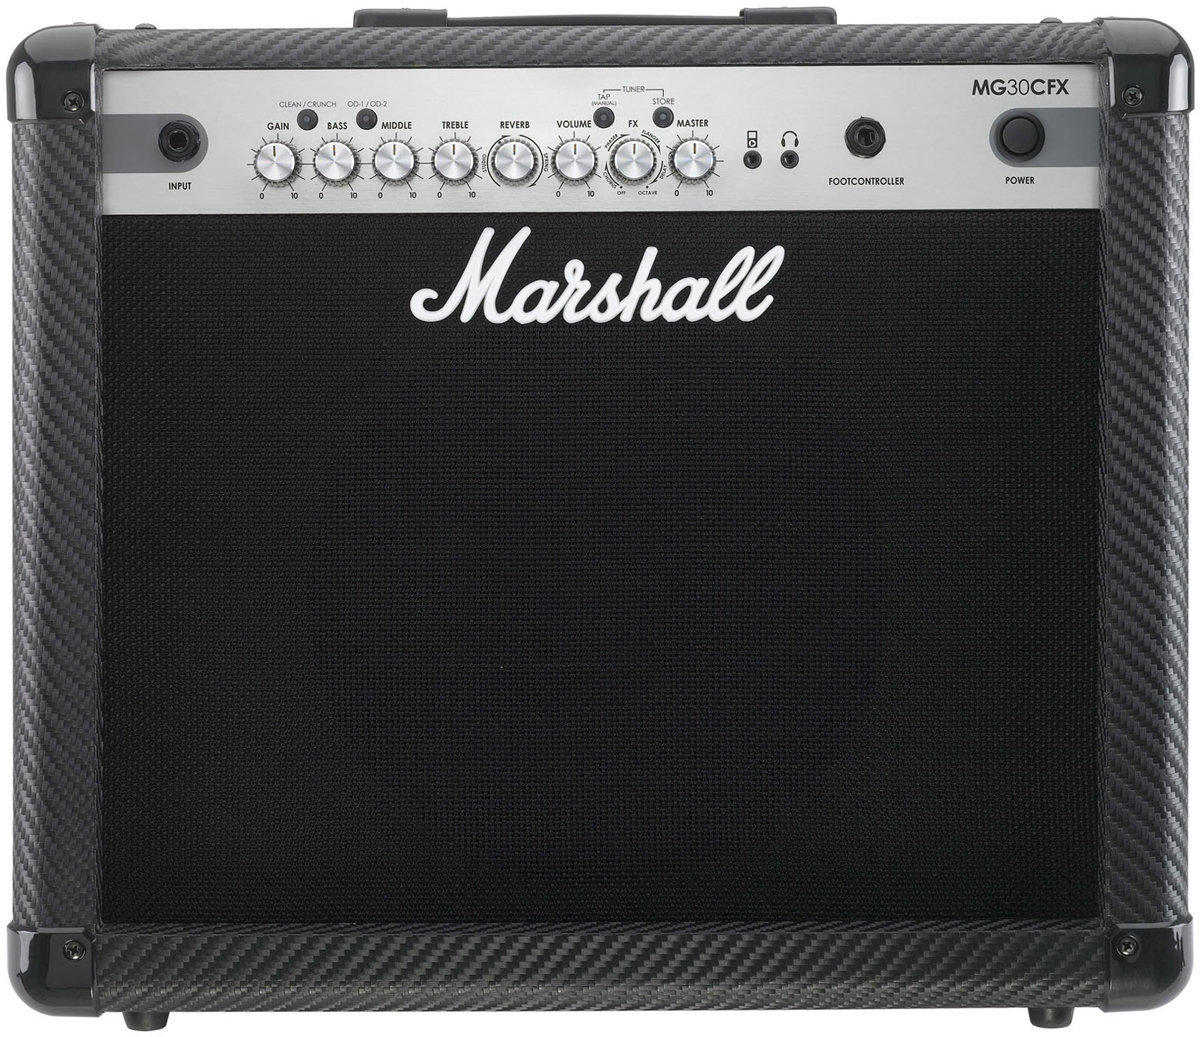 Solid-State Combo Marshall MG30CFX Carbon Fibre